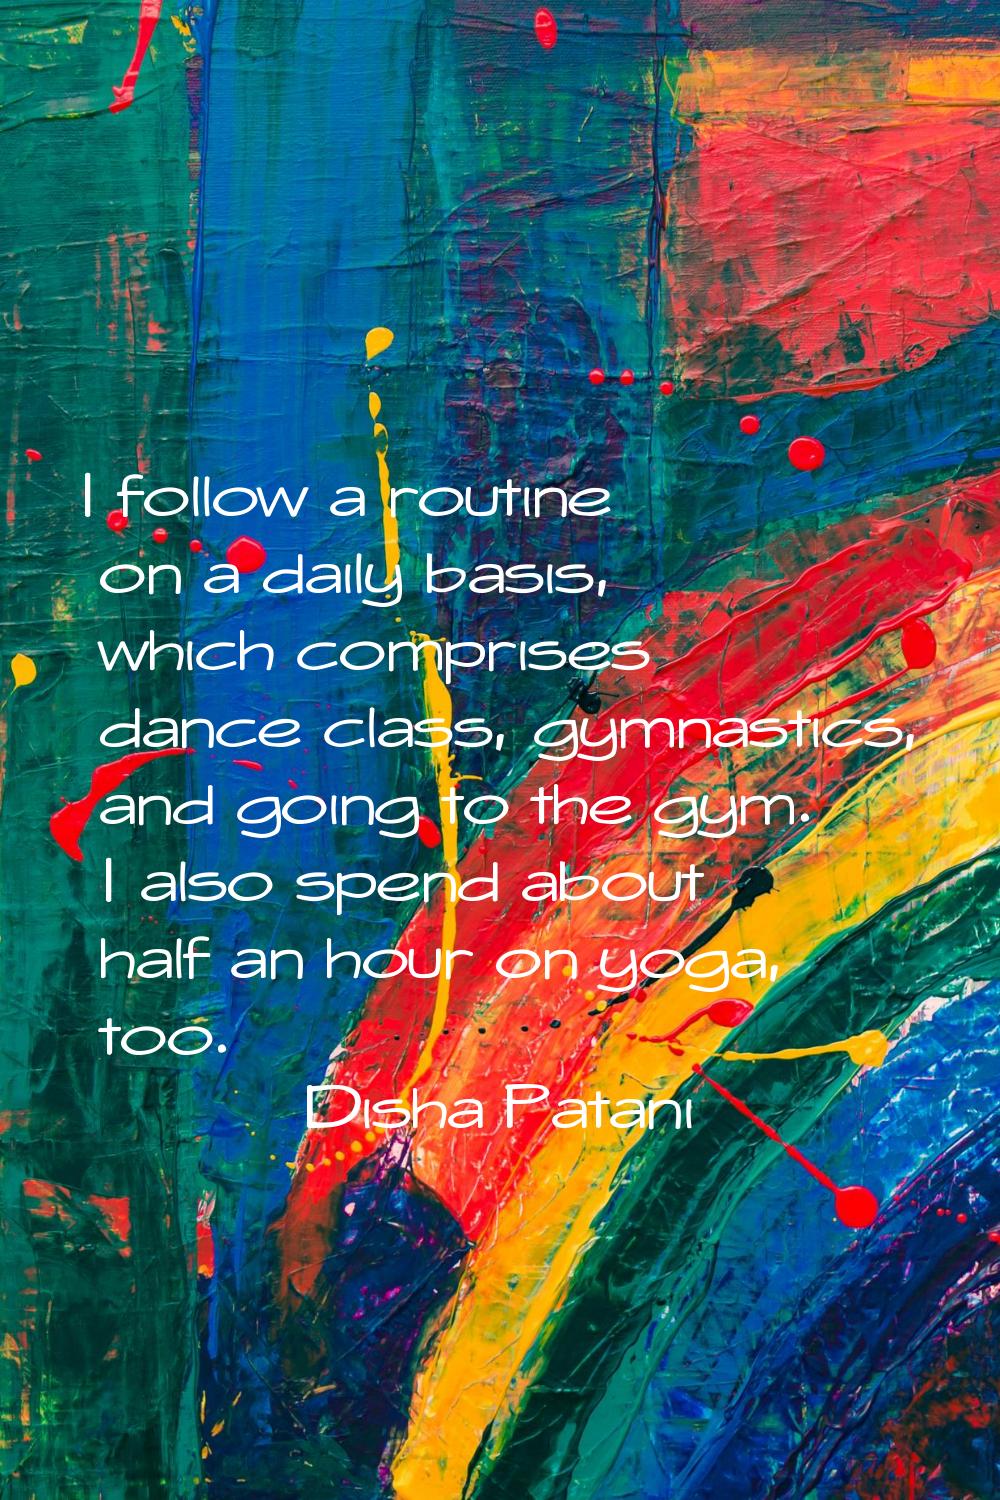 I follow a routine on a daily basis, which comprises dance class, gymnastics, and going to the gym.